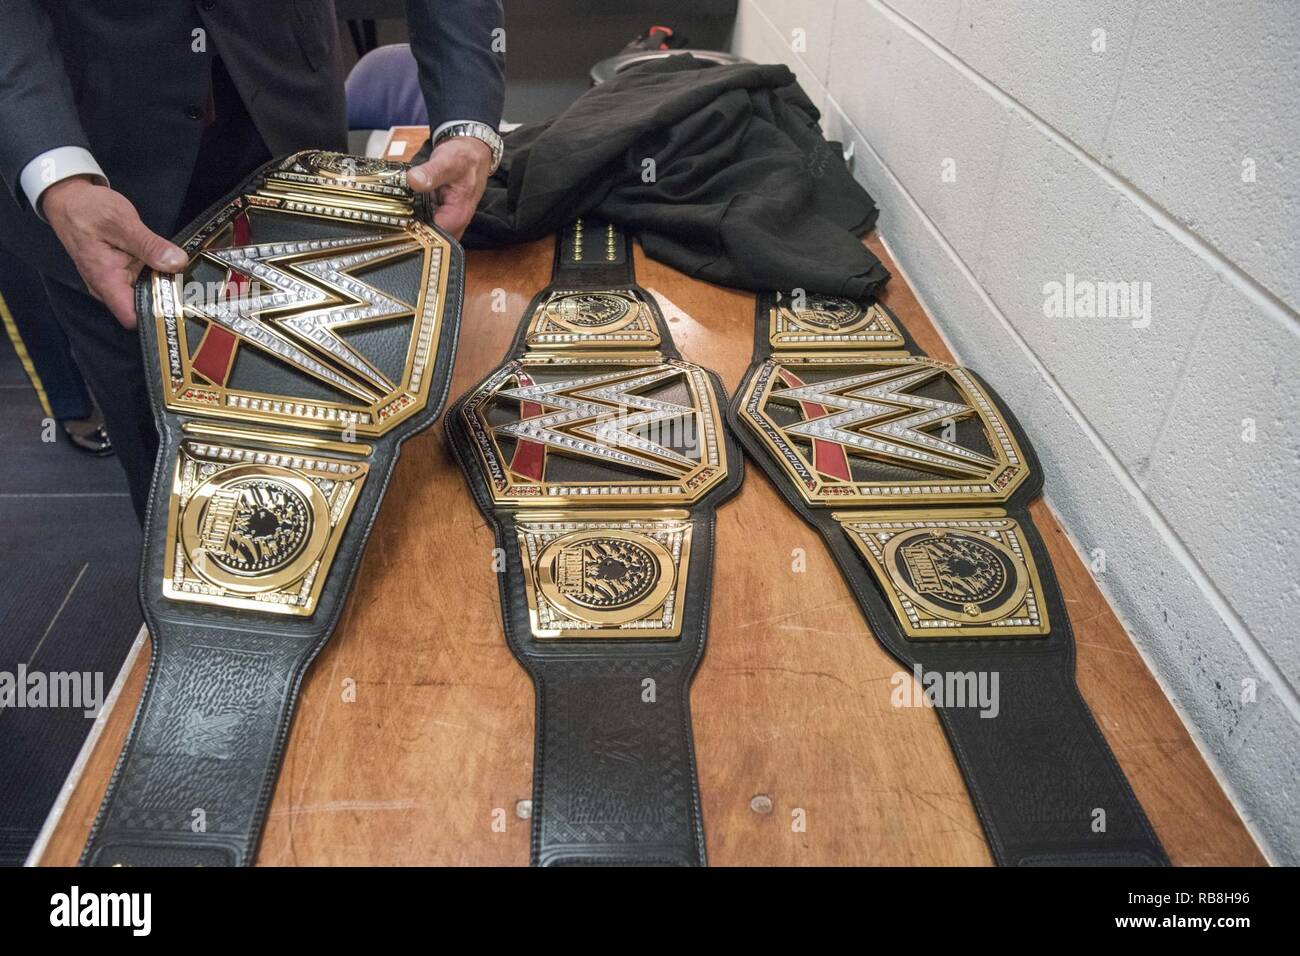 Triple H gifts Super Bowl LV champions a WWE title belt after last night's  victory - WWE News, WWE Results, AEW News, AEW Results